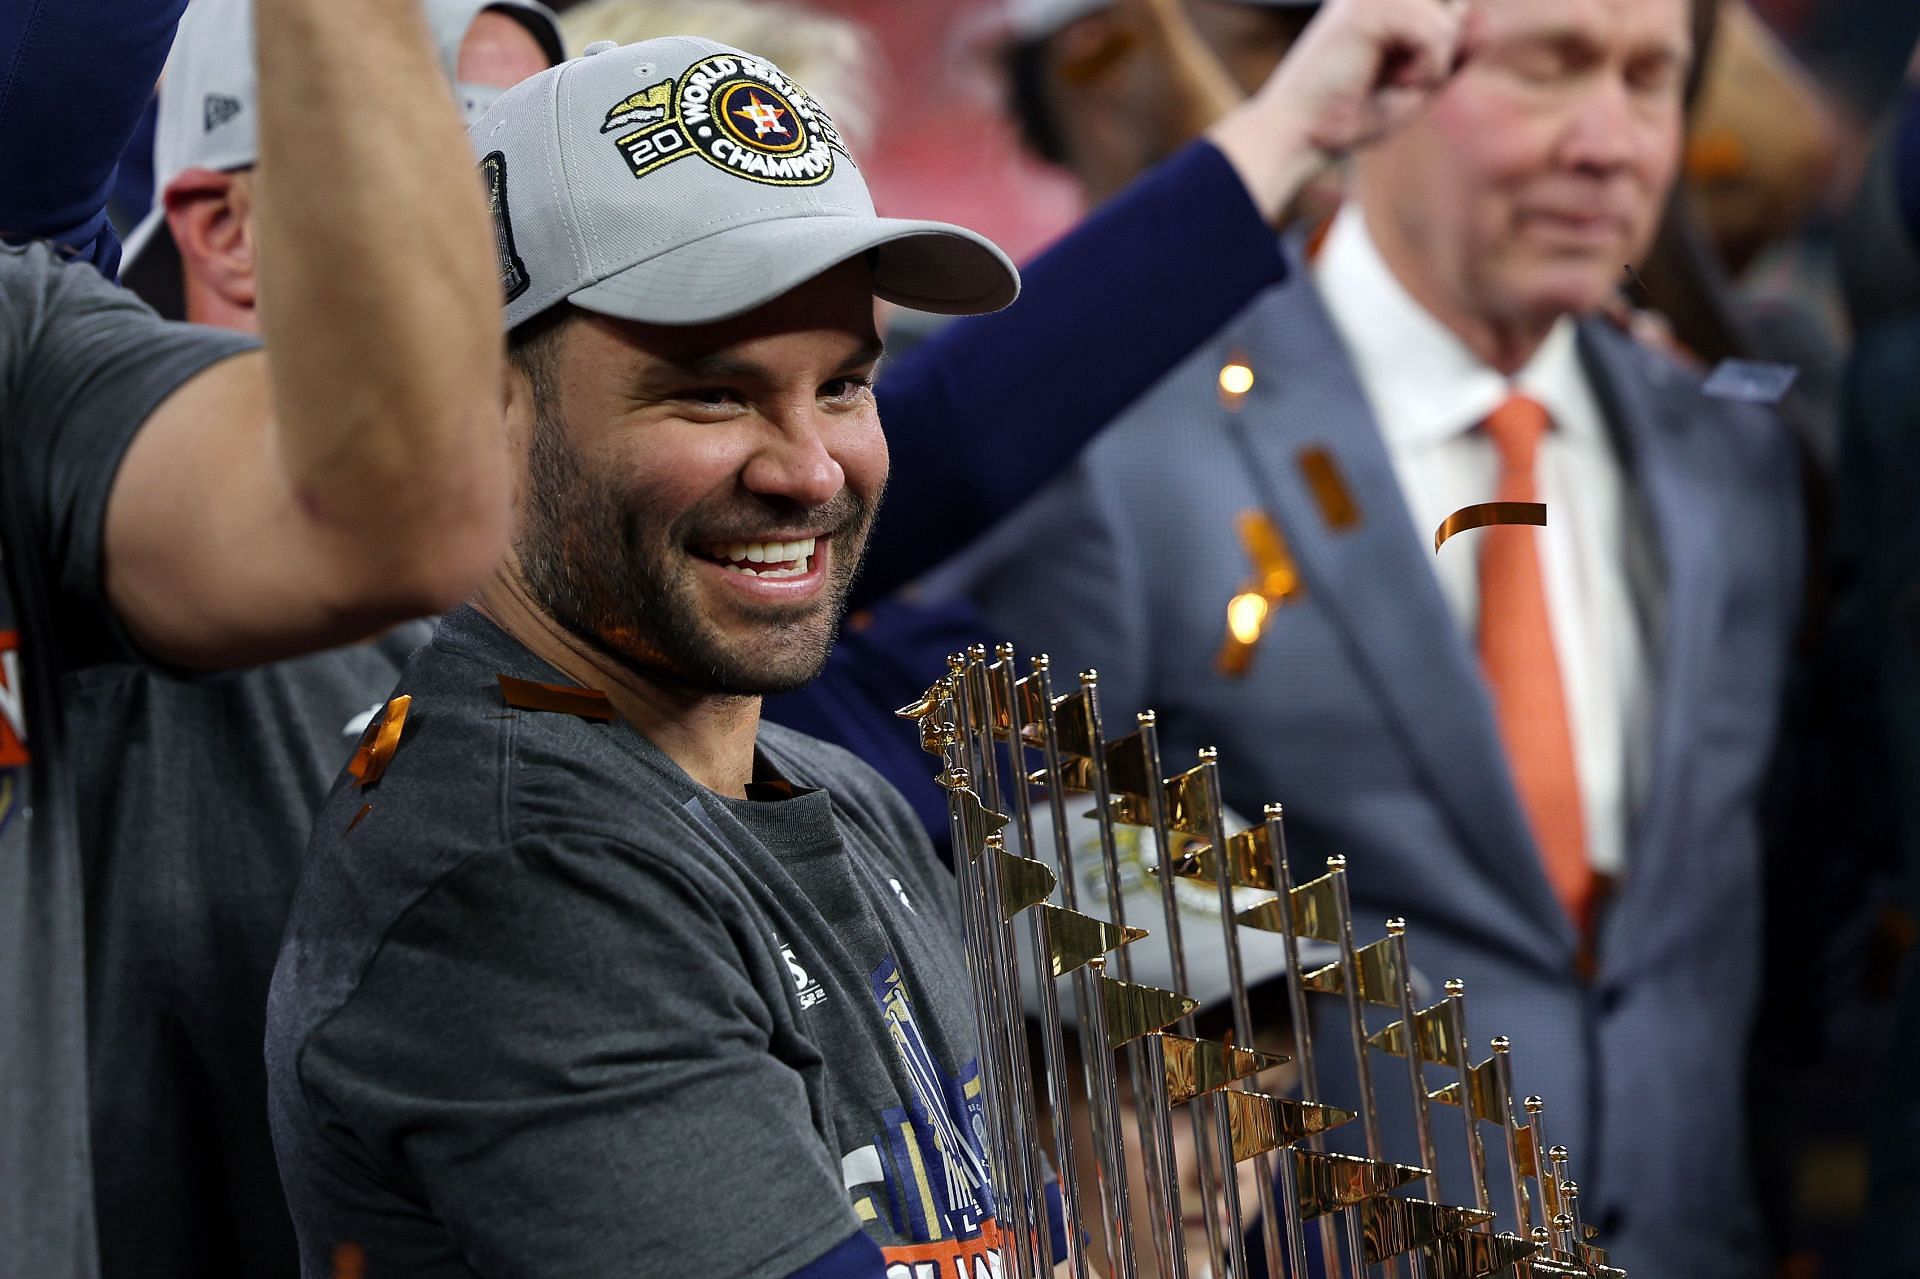 Jose Altuve height: How tall is Jose Altuve? Looking at the